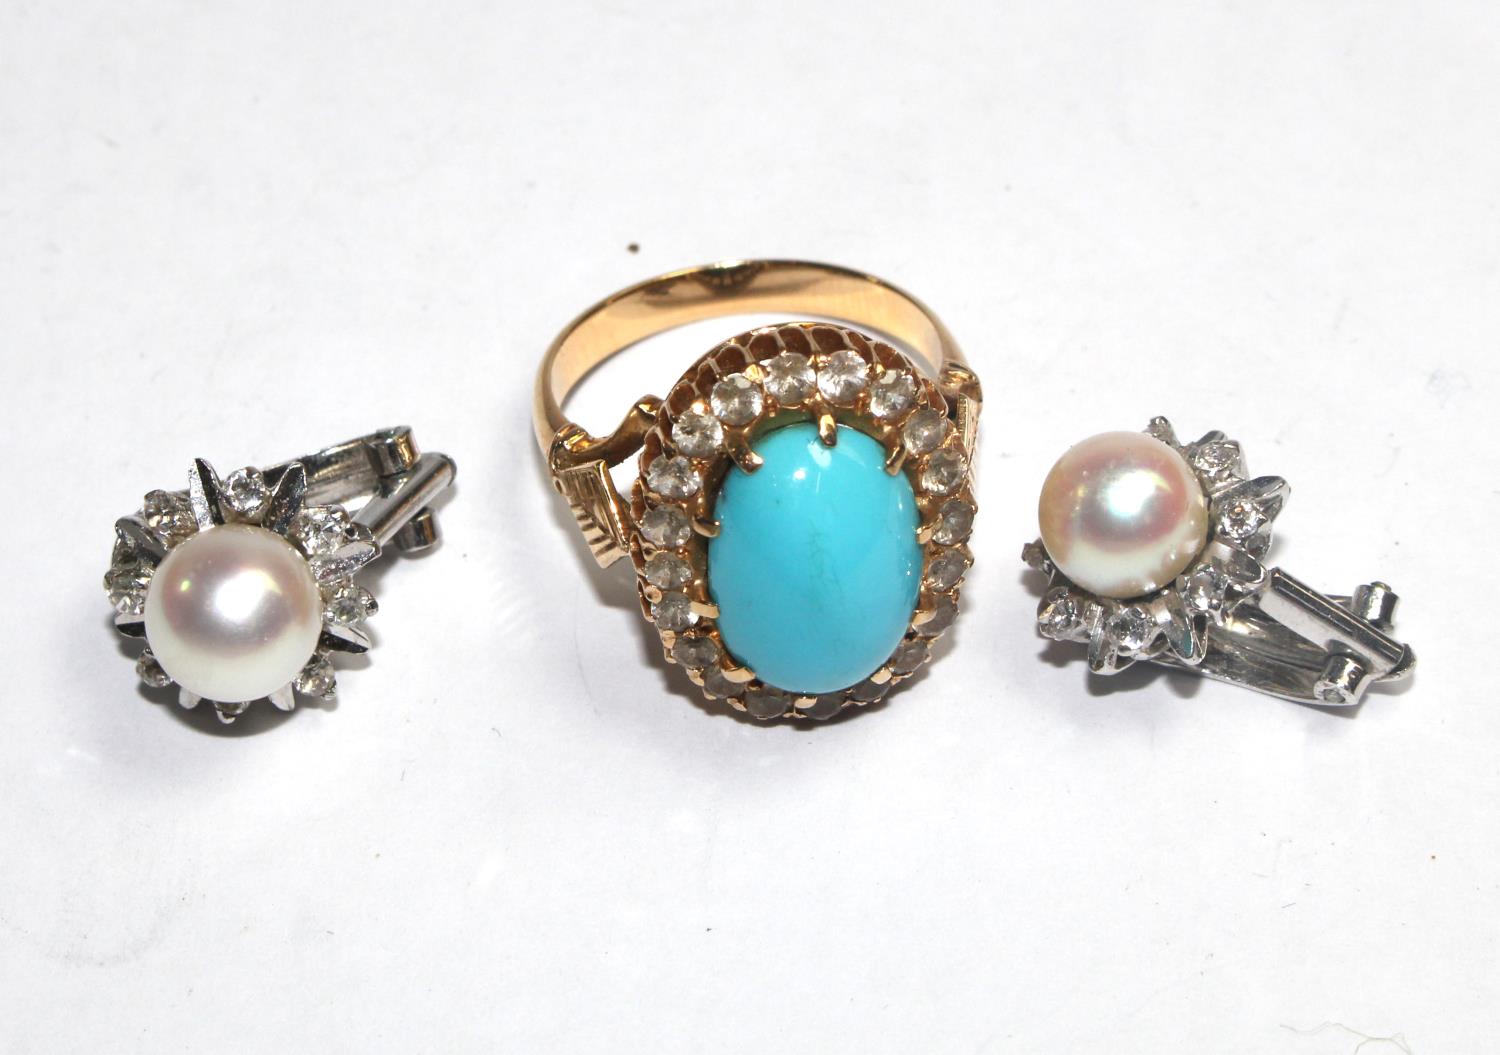 A pair of 18 carat white gold pearl earrings and a turquoise and gold coloured metal ring